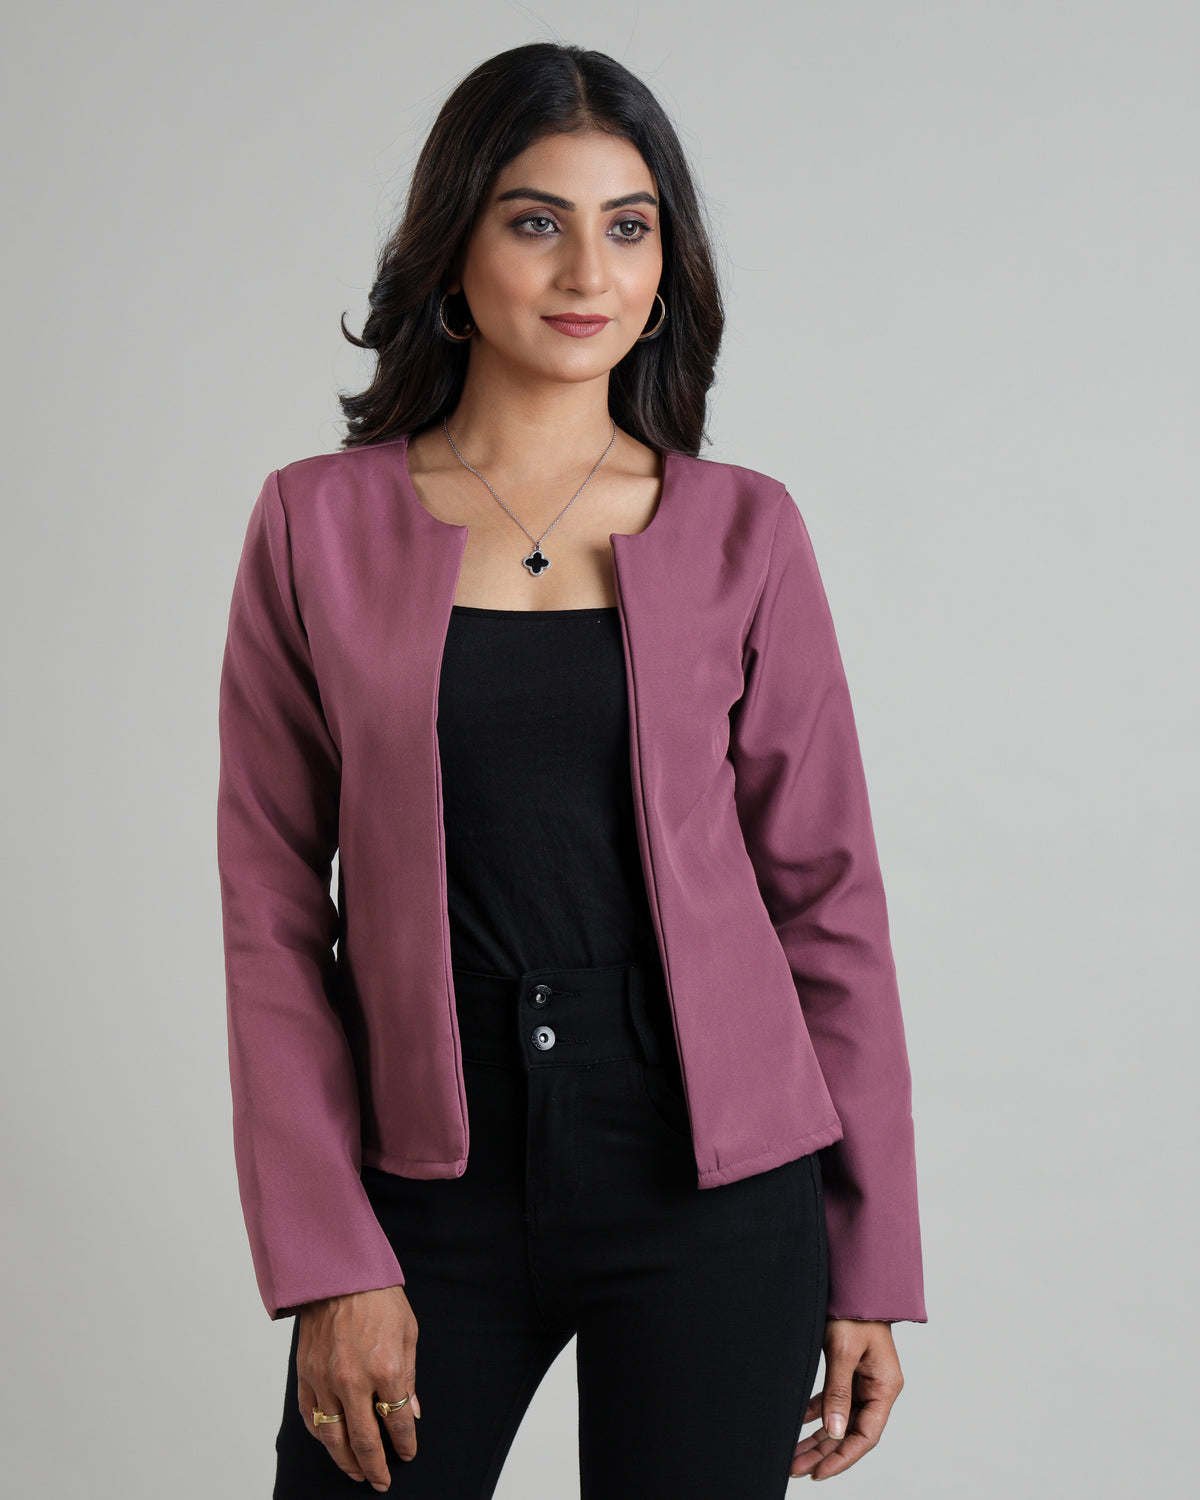 Wine And Shine: The Boldly Purple Women's Jacket